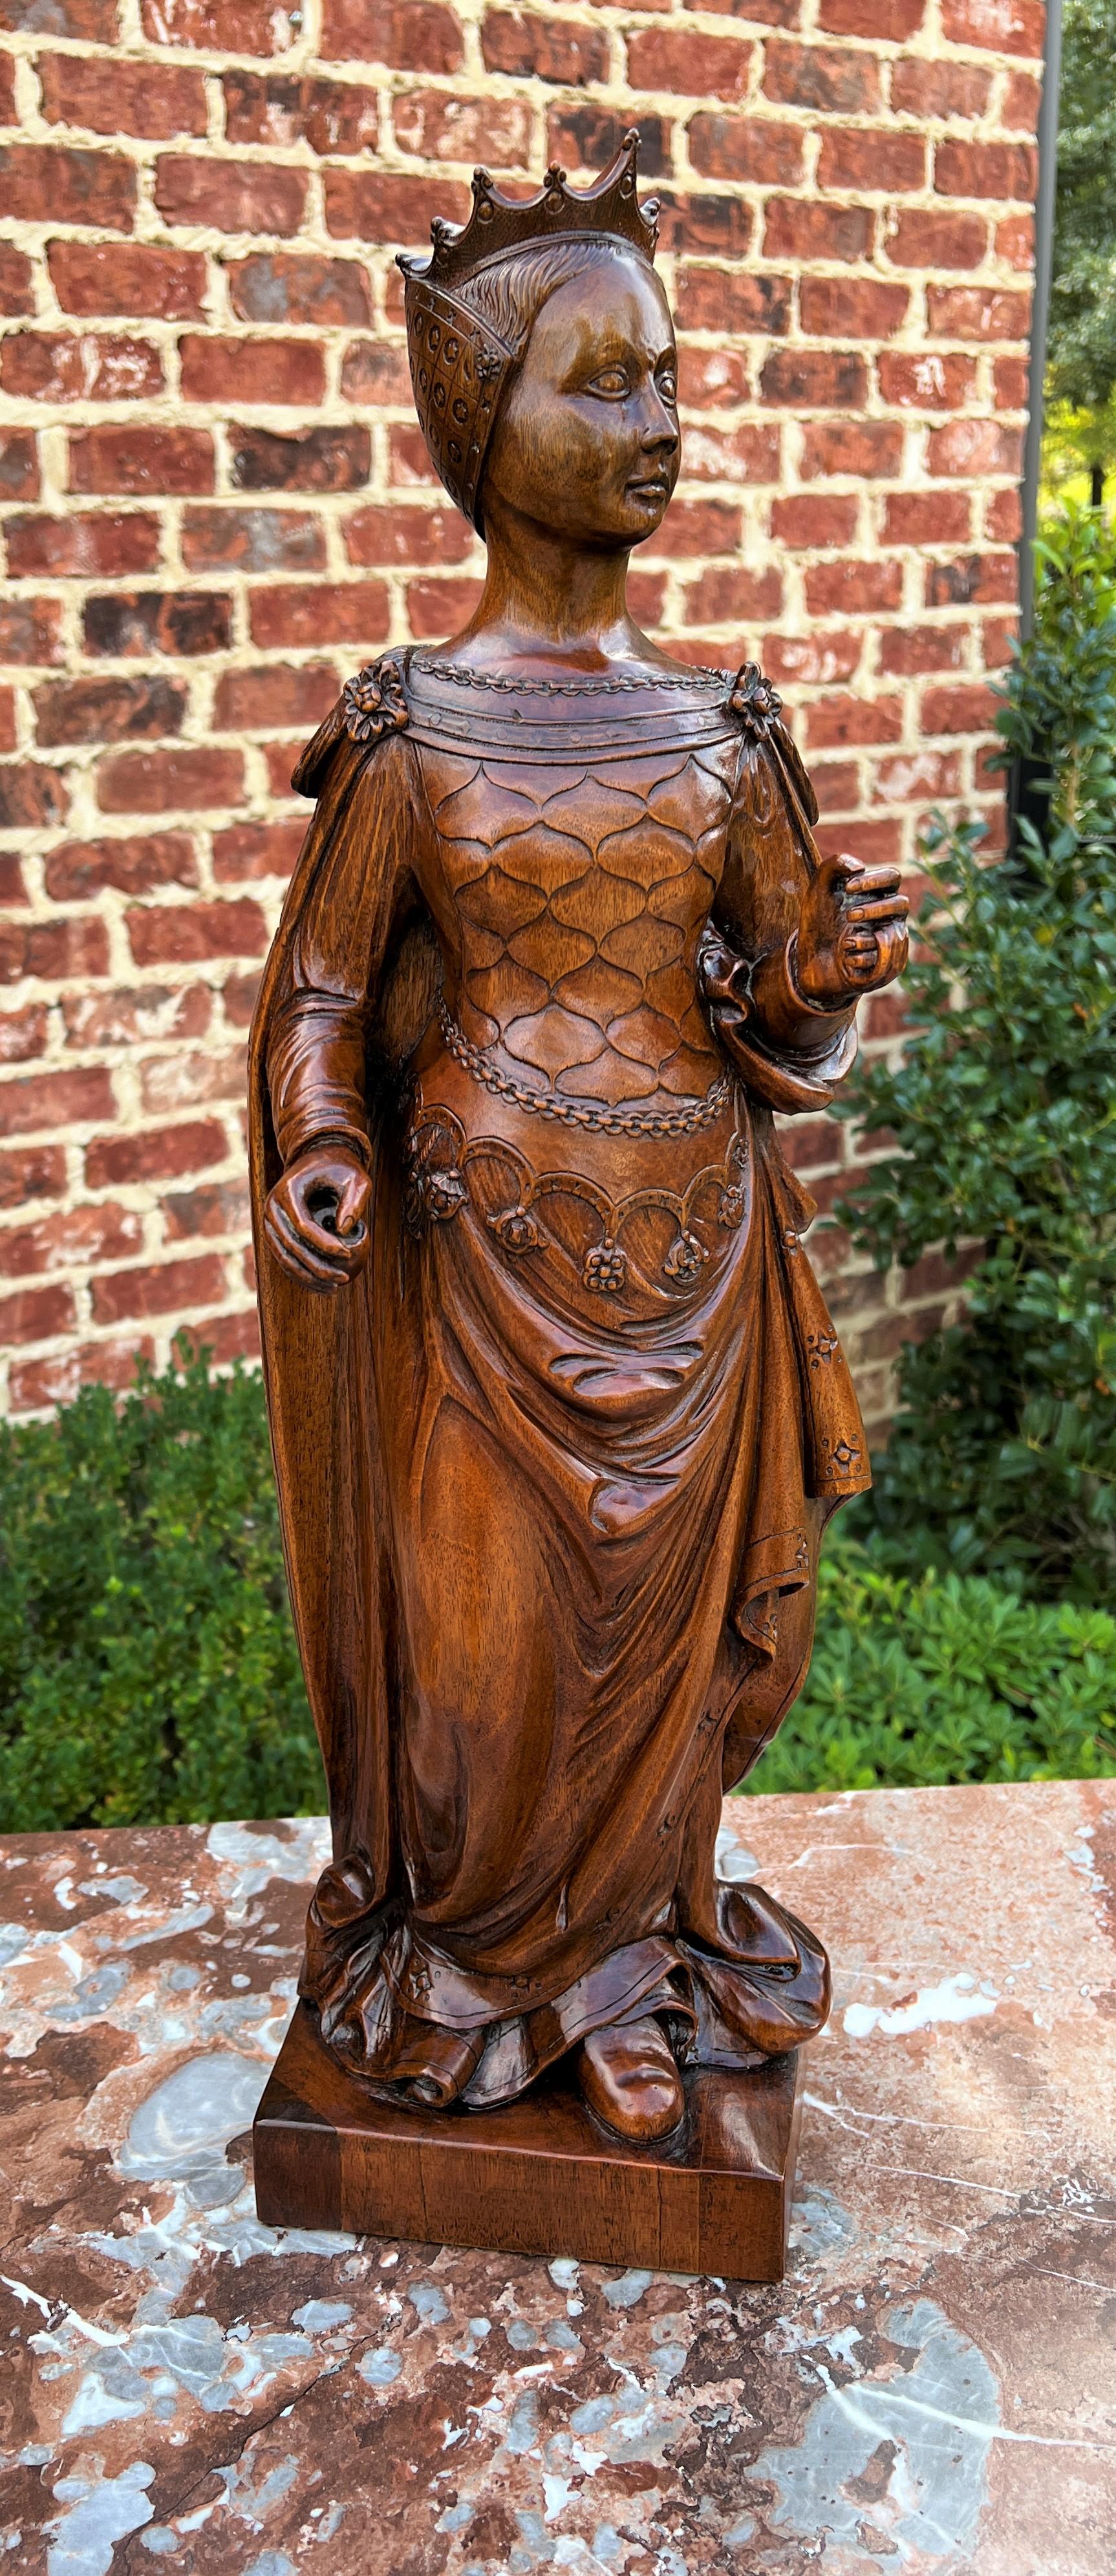 RARE Carved Oak Statue Figure~~Medieval Queen or Lady with Crown

MASTERFULLY CARVED from one piece of oak depicting a Medieval era queen (maybe after Guinevere!) or lady wearing a crown~~EXQUISITE DETAILS!   

Excellent decorative piece for today's